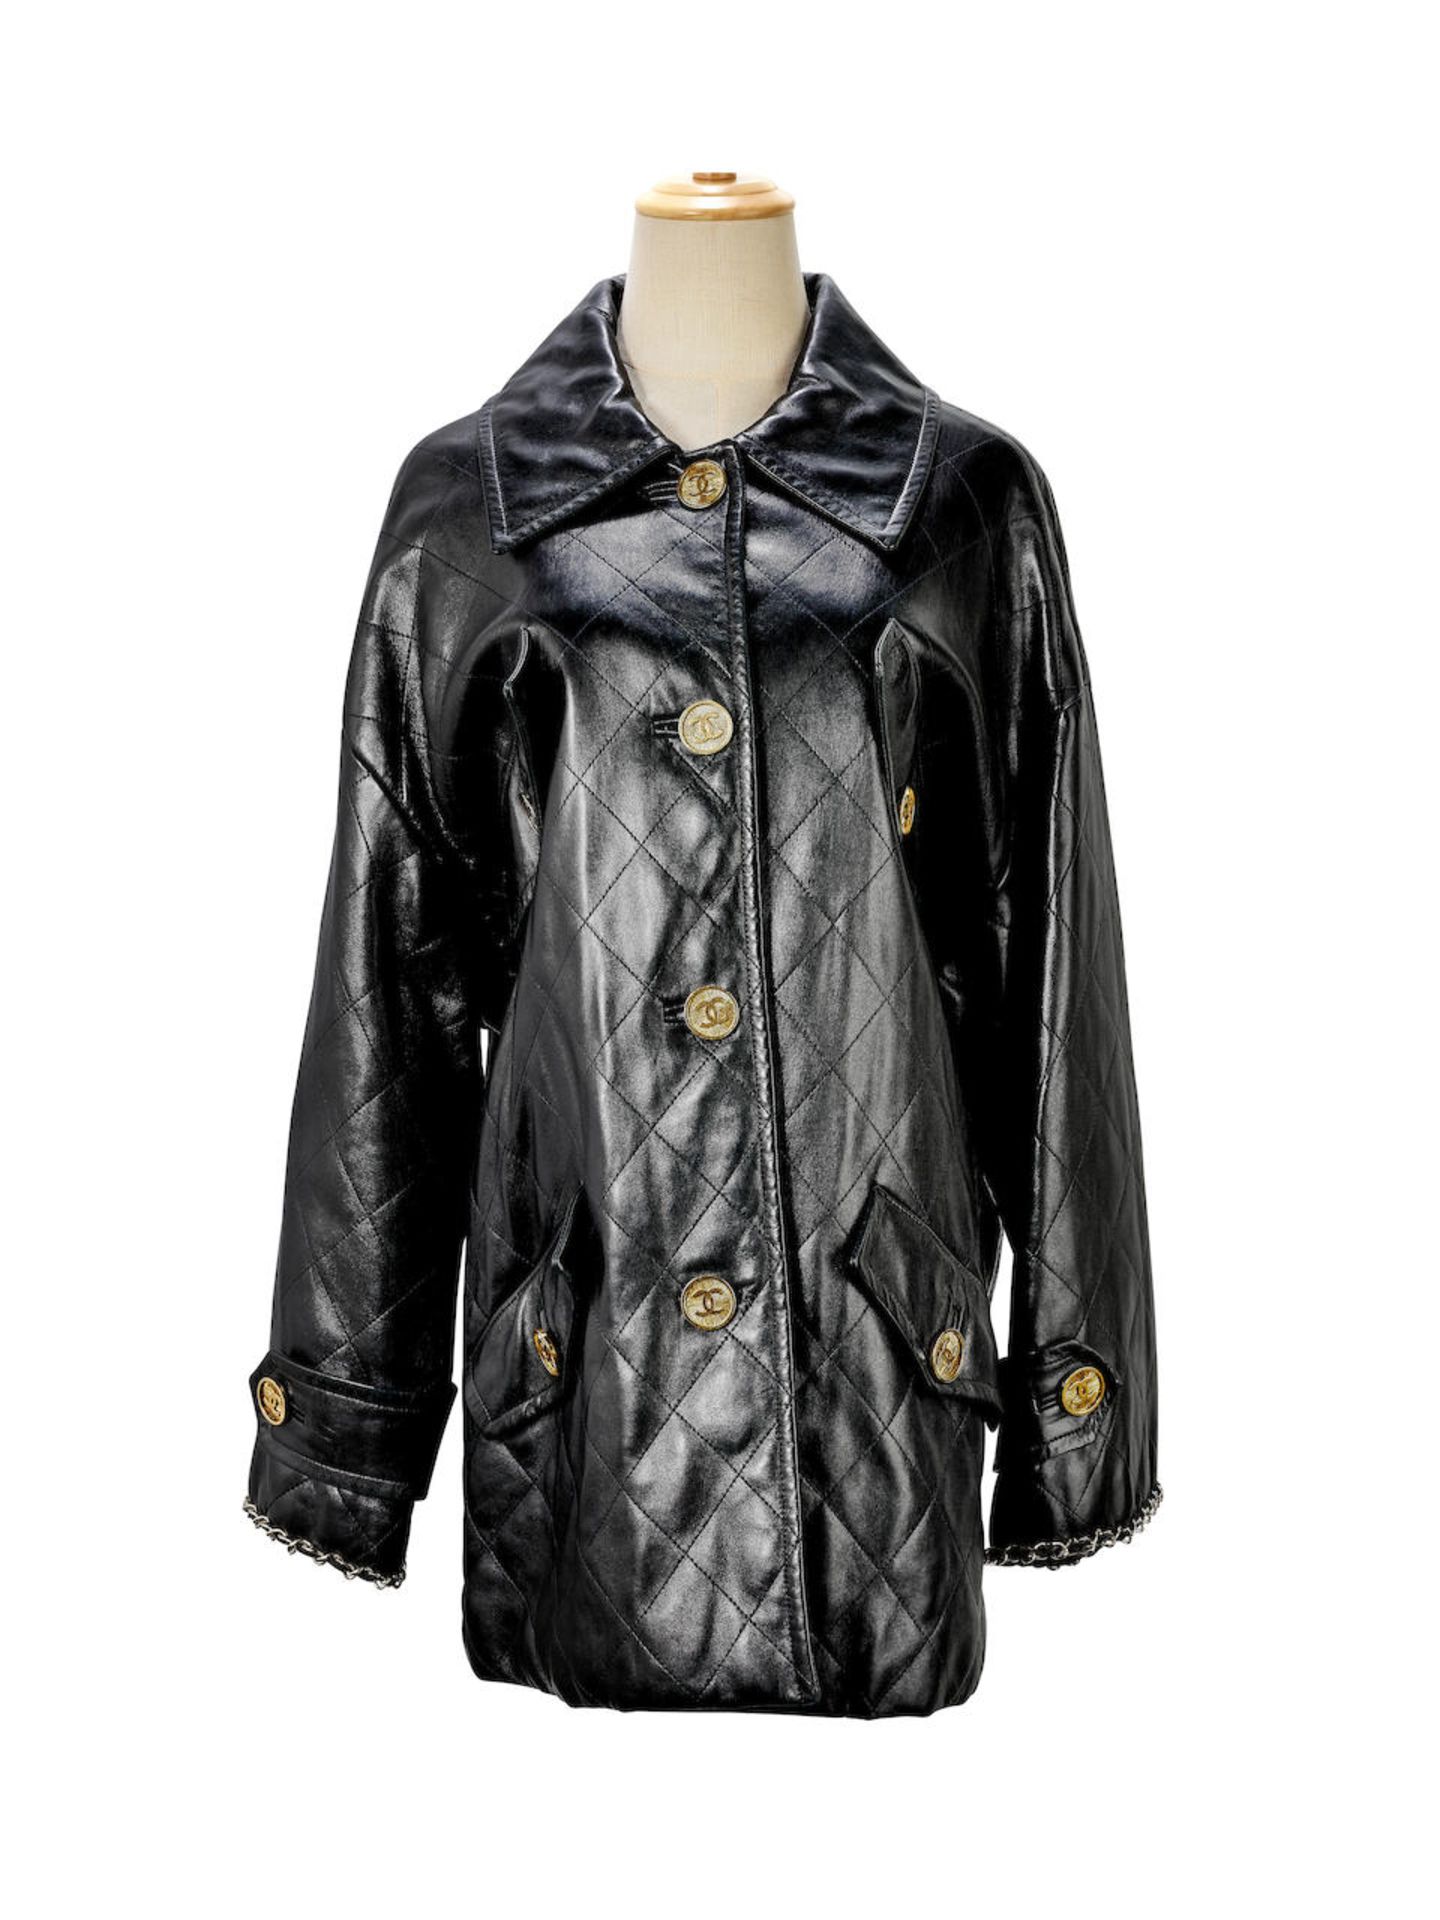 CHANEL: BLACK QUILTED LEATHER JACKET WITH CC BUTTONS (Includes original garment bag)